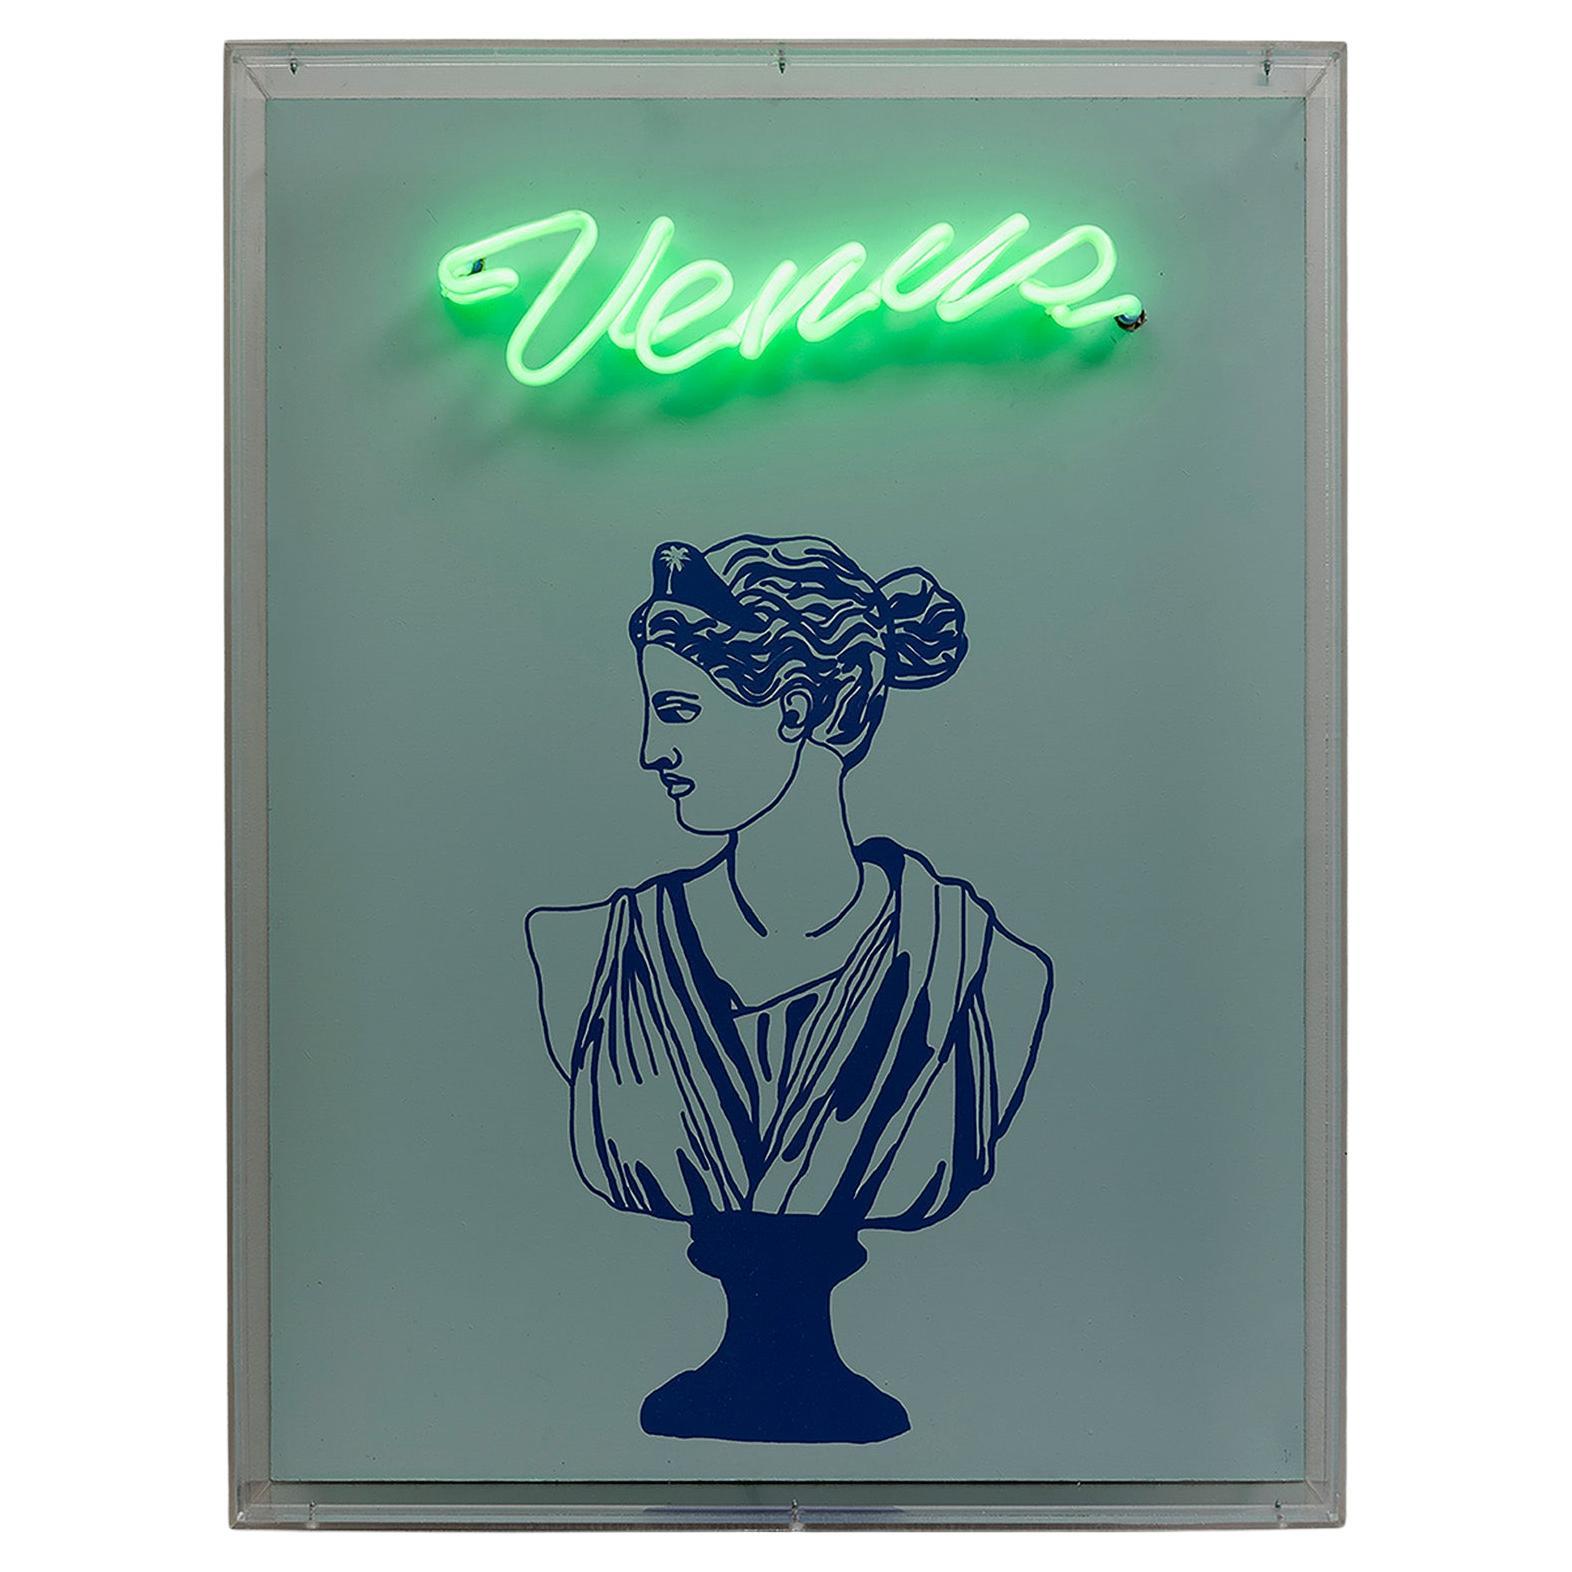 Venus. Neon Light Box Wall Sculpture. From the series Neon Classics For Sale